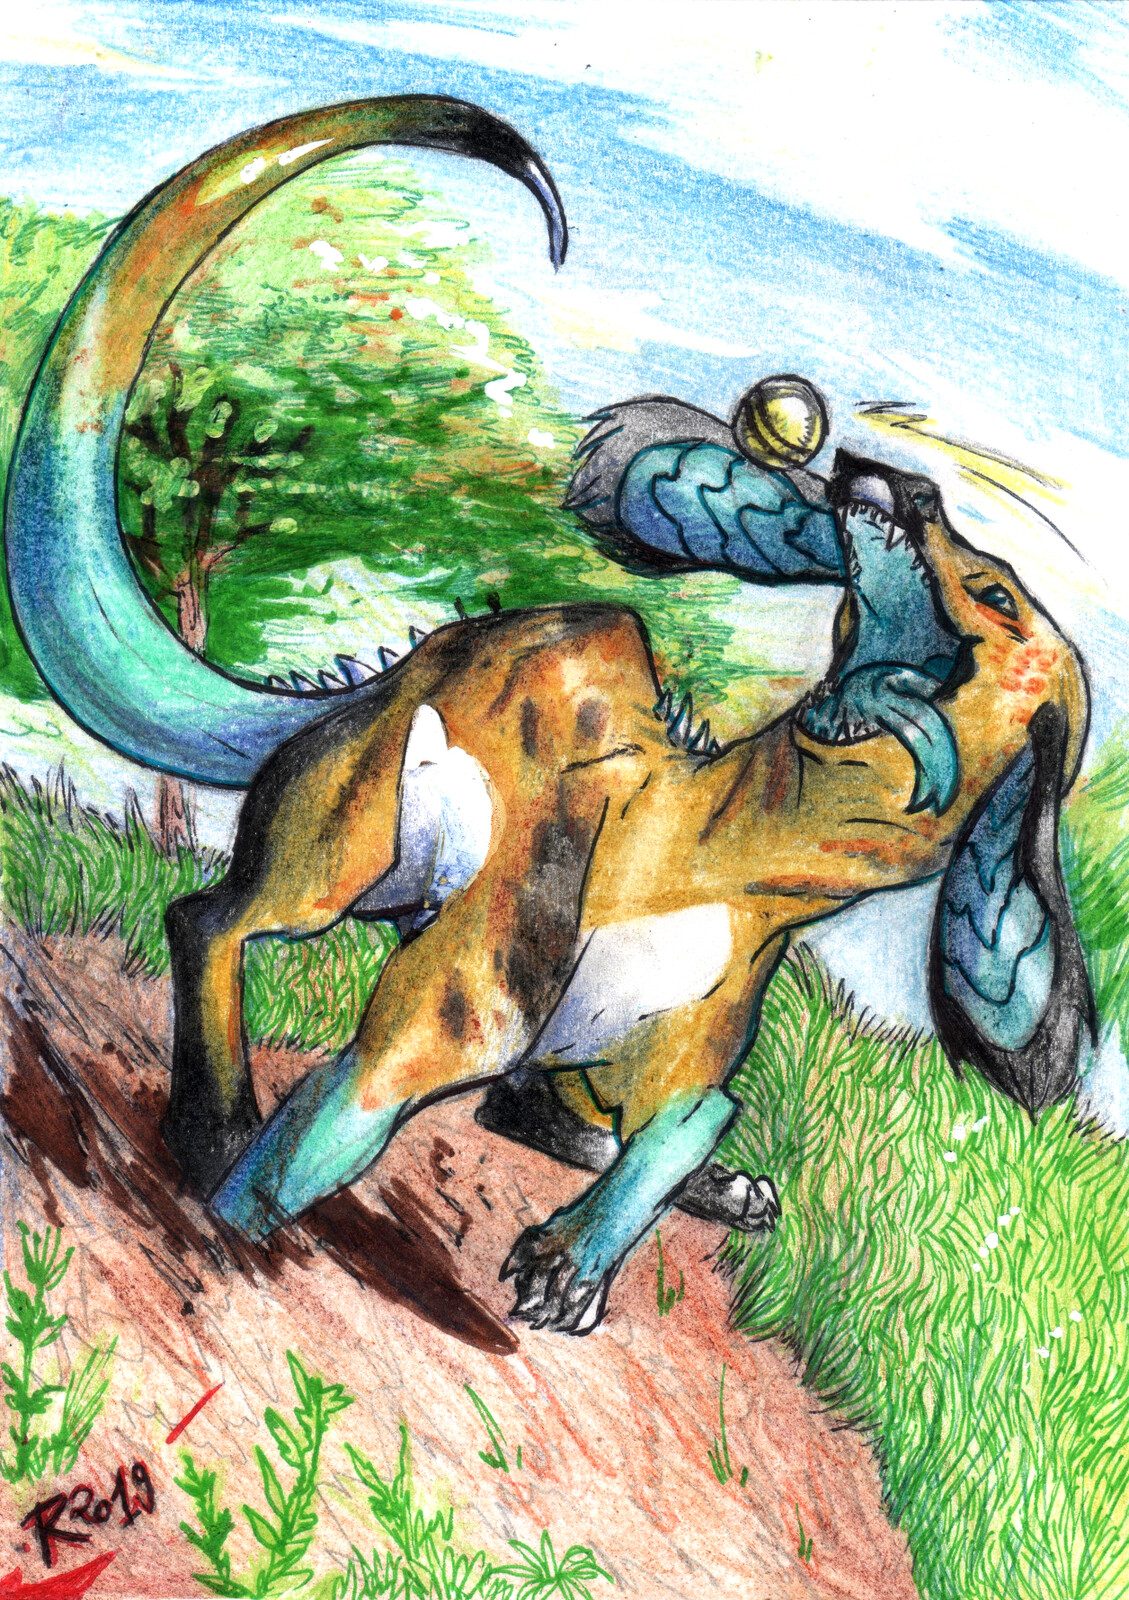 Another ArtFight attack! A dragon that is also a dog? We love dogs and dragons, so we had to portray this playful creature! She is Chloe, a character that belongs to Zheffari. Drawn in traditional, with colored pencils.